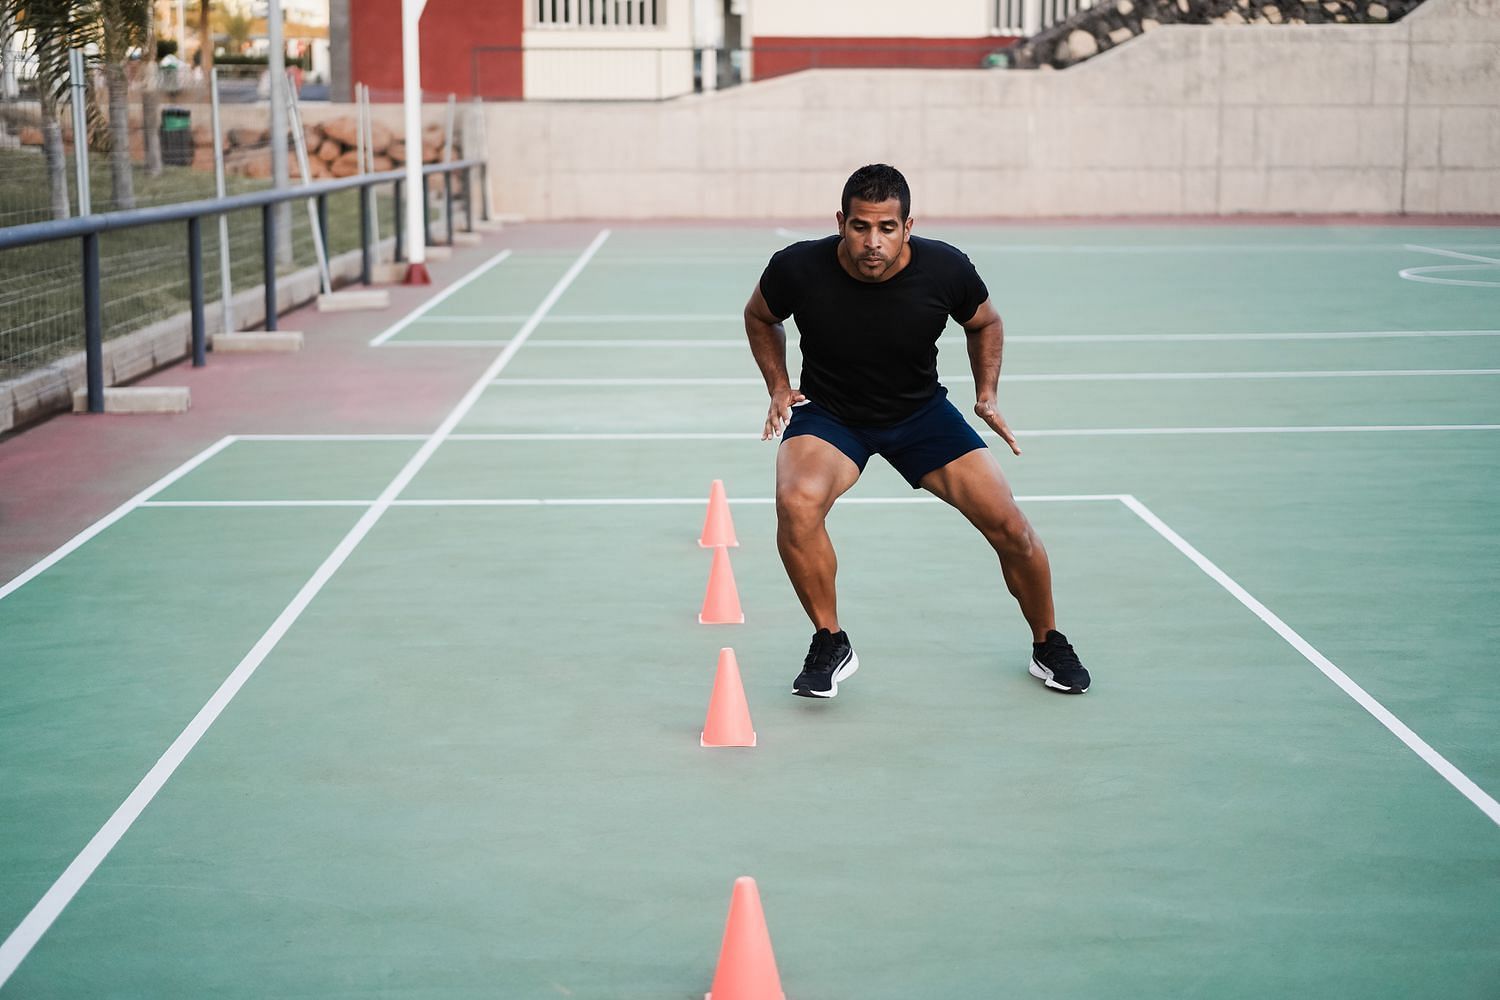 Shuttle runs include sprinting at high speeds between two sites, making them an ideal exercise for increasing speed, agility, and general fitness (Getty Images)